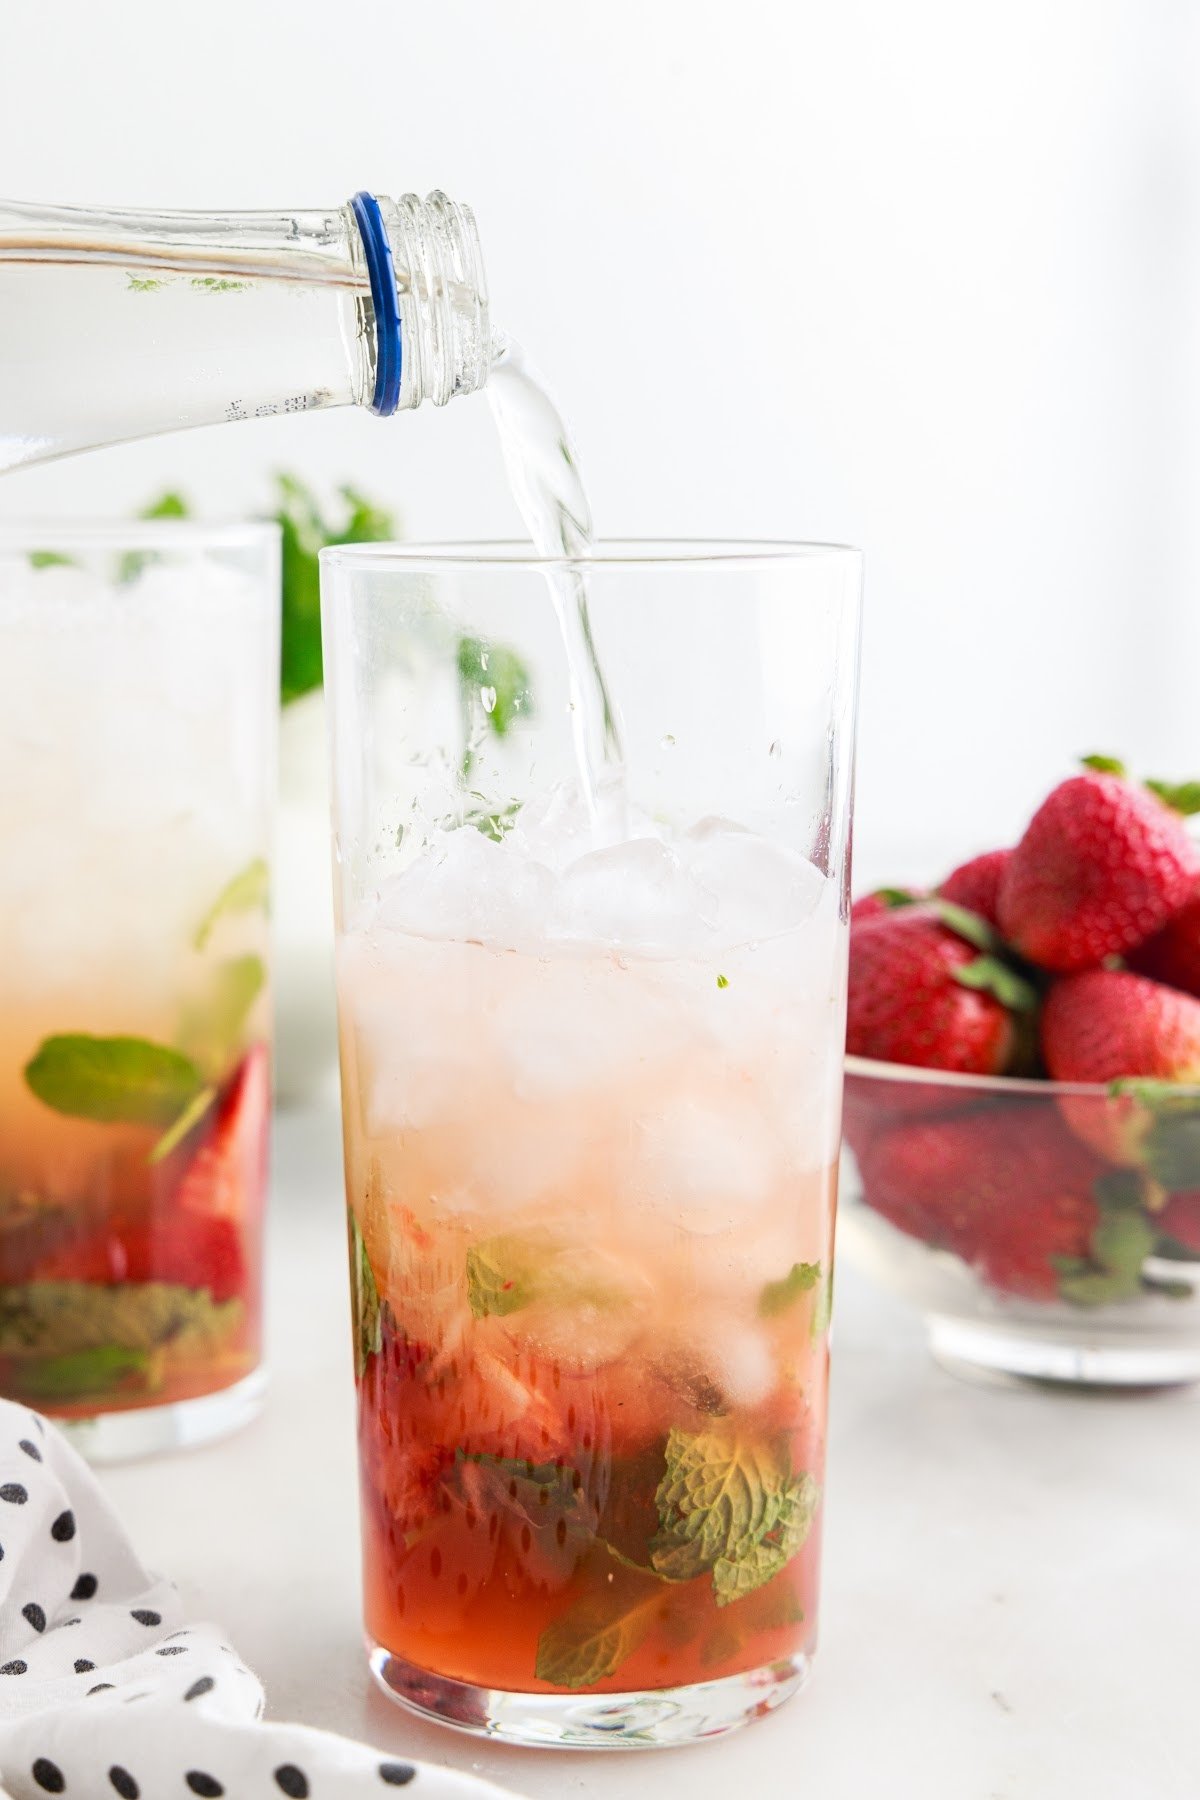 Sparkling water being added to the Strawberry Mojito.